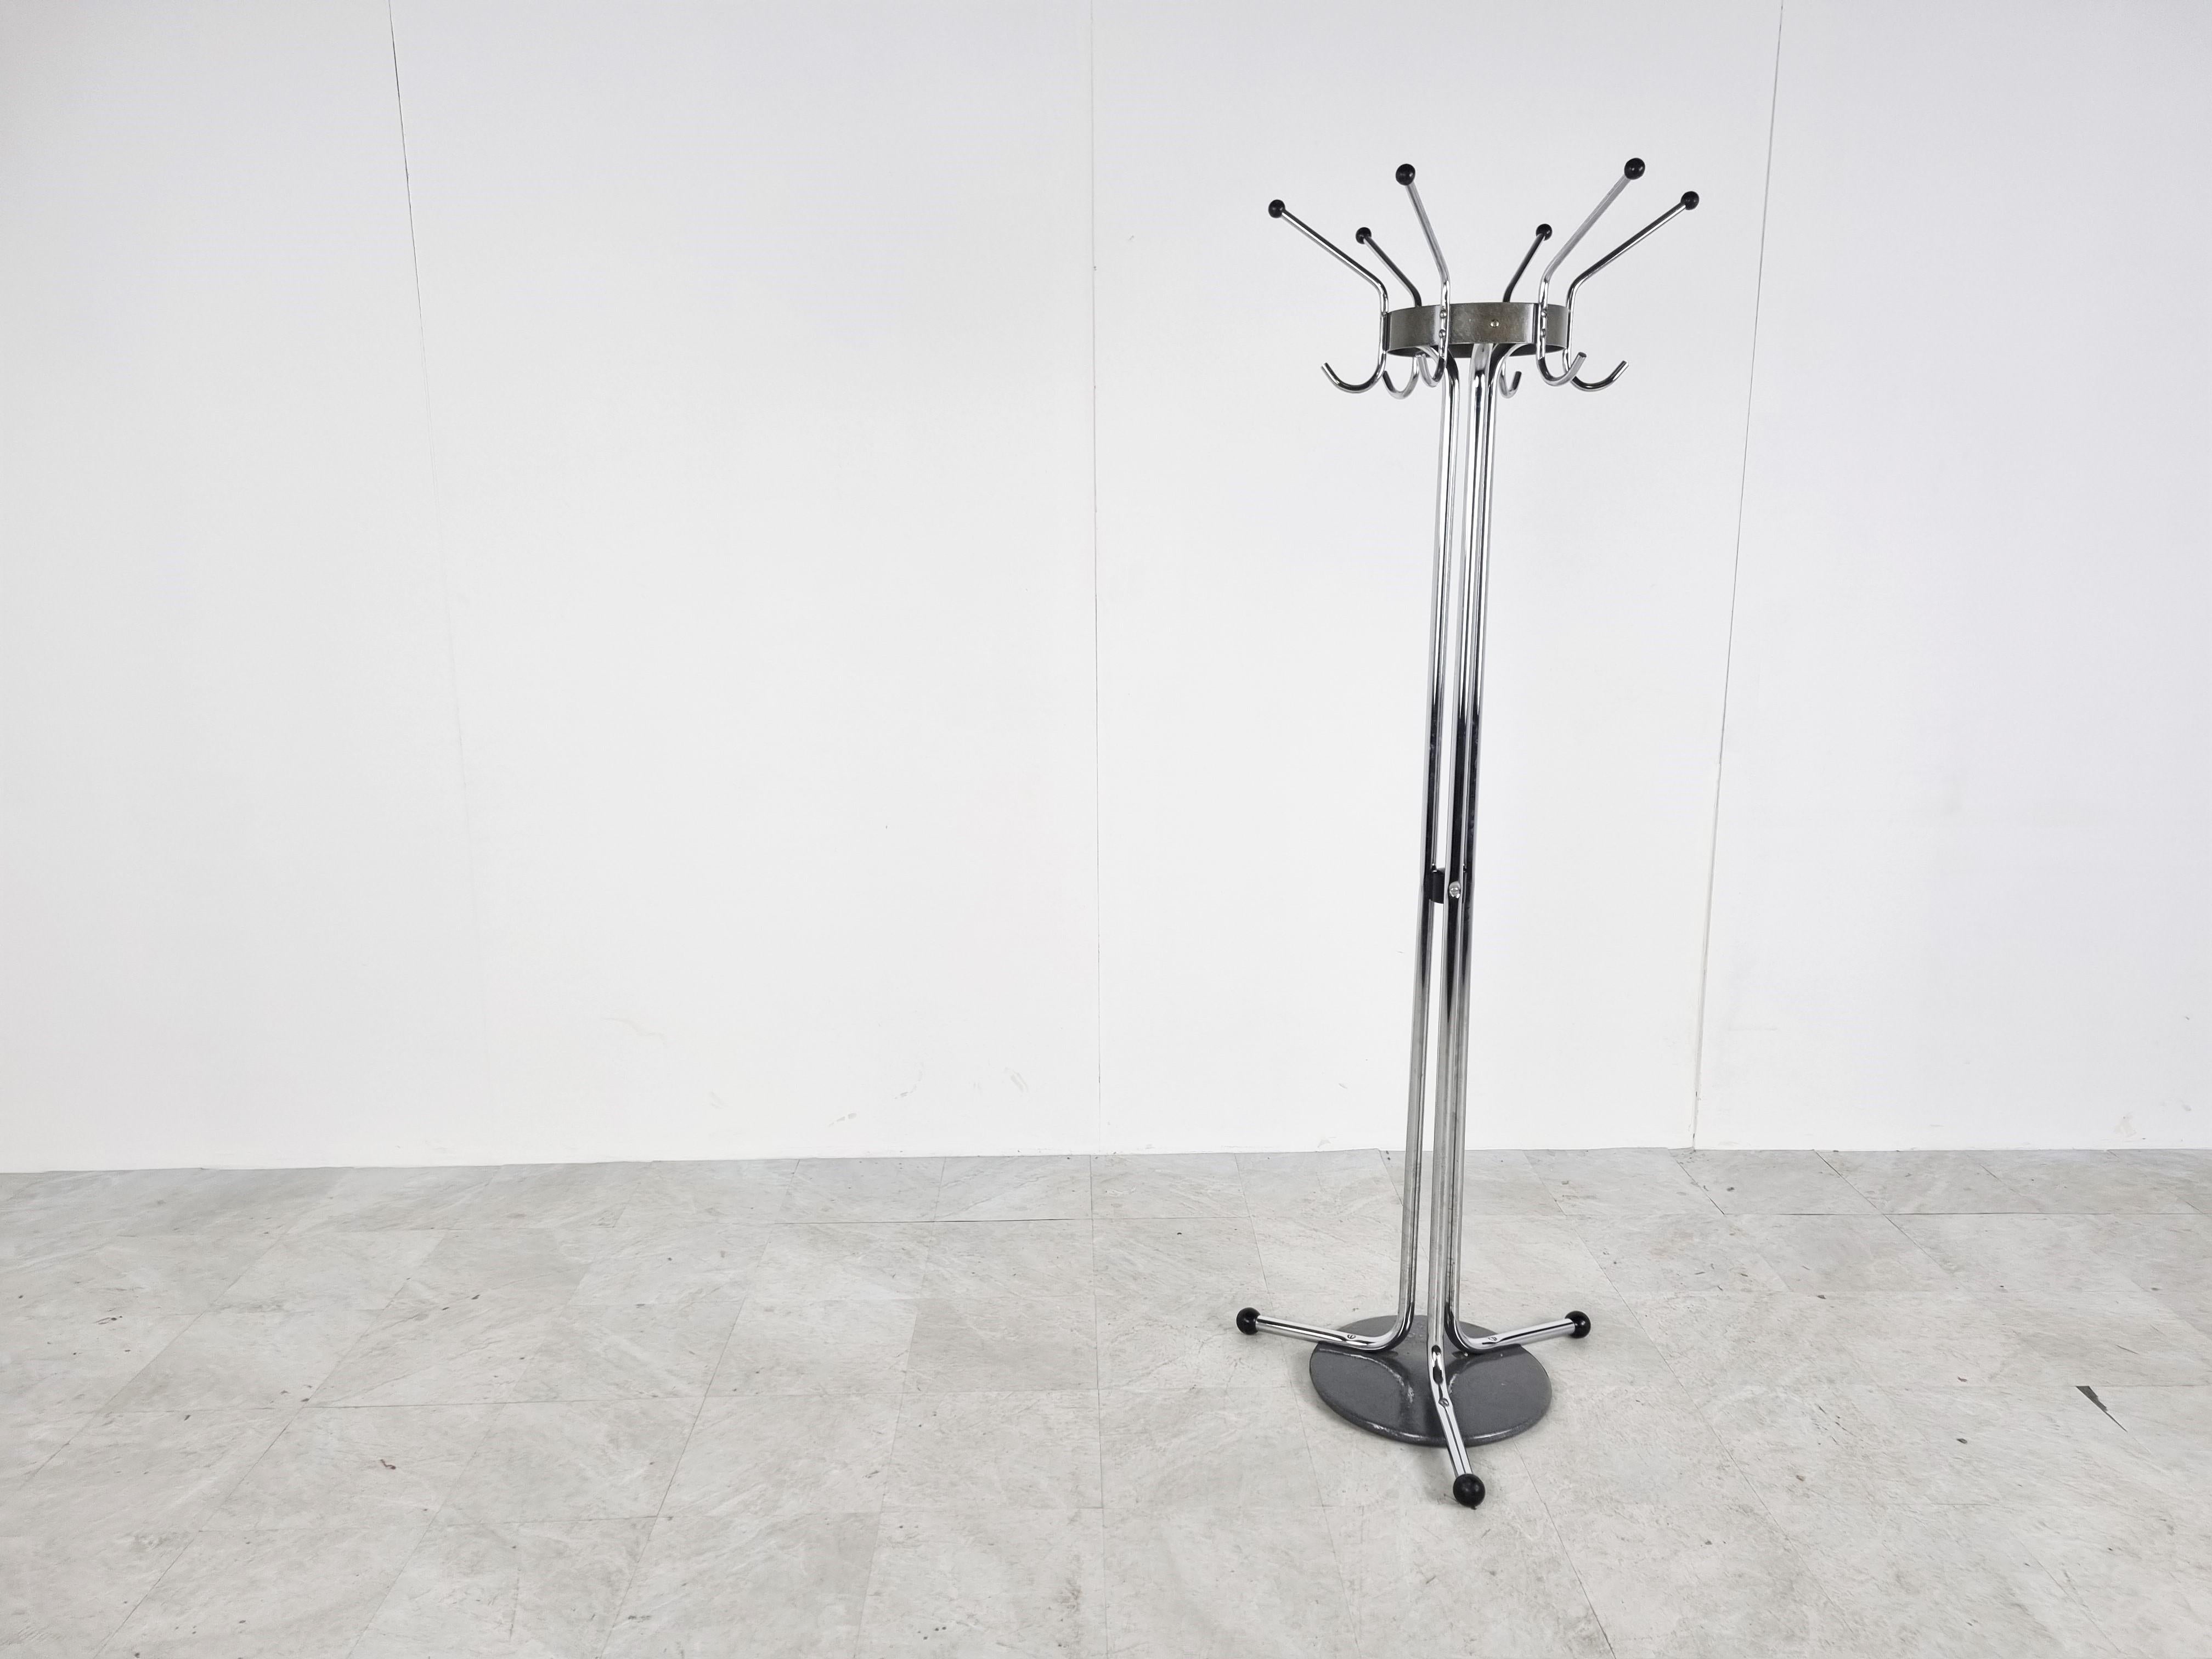 Late 20th Century Vintage Chrome Coat Stands by Willy Van Der Meeren for Tubax, 1970s For Sale